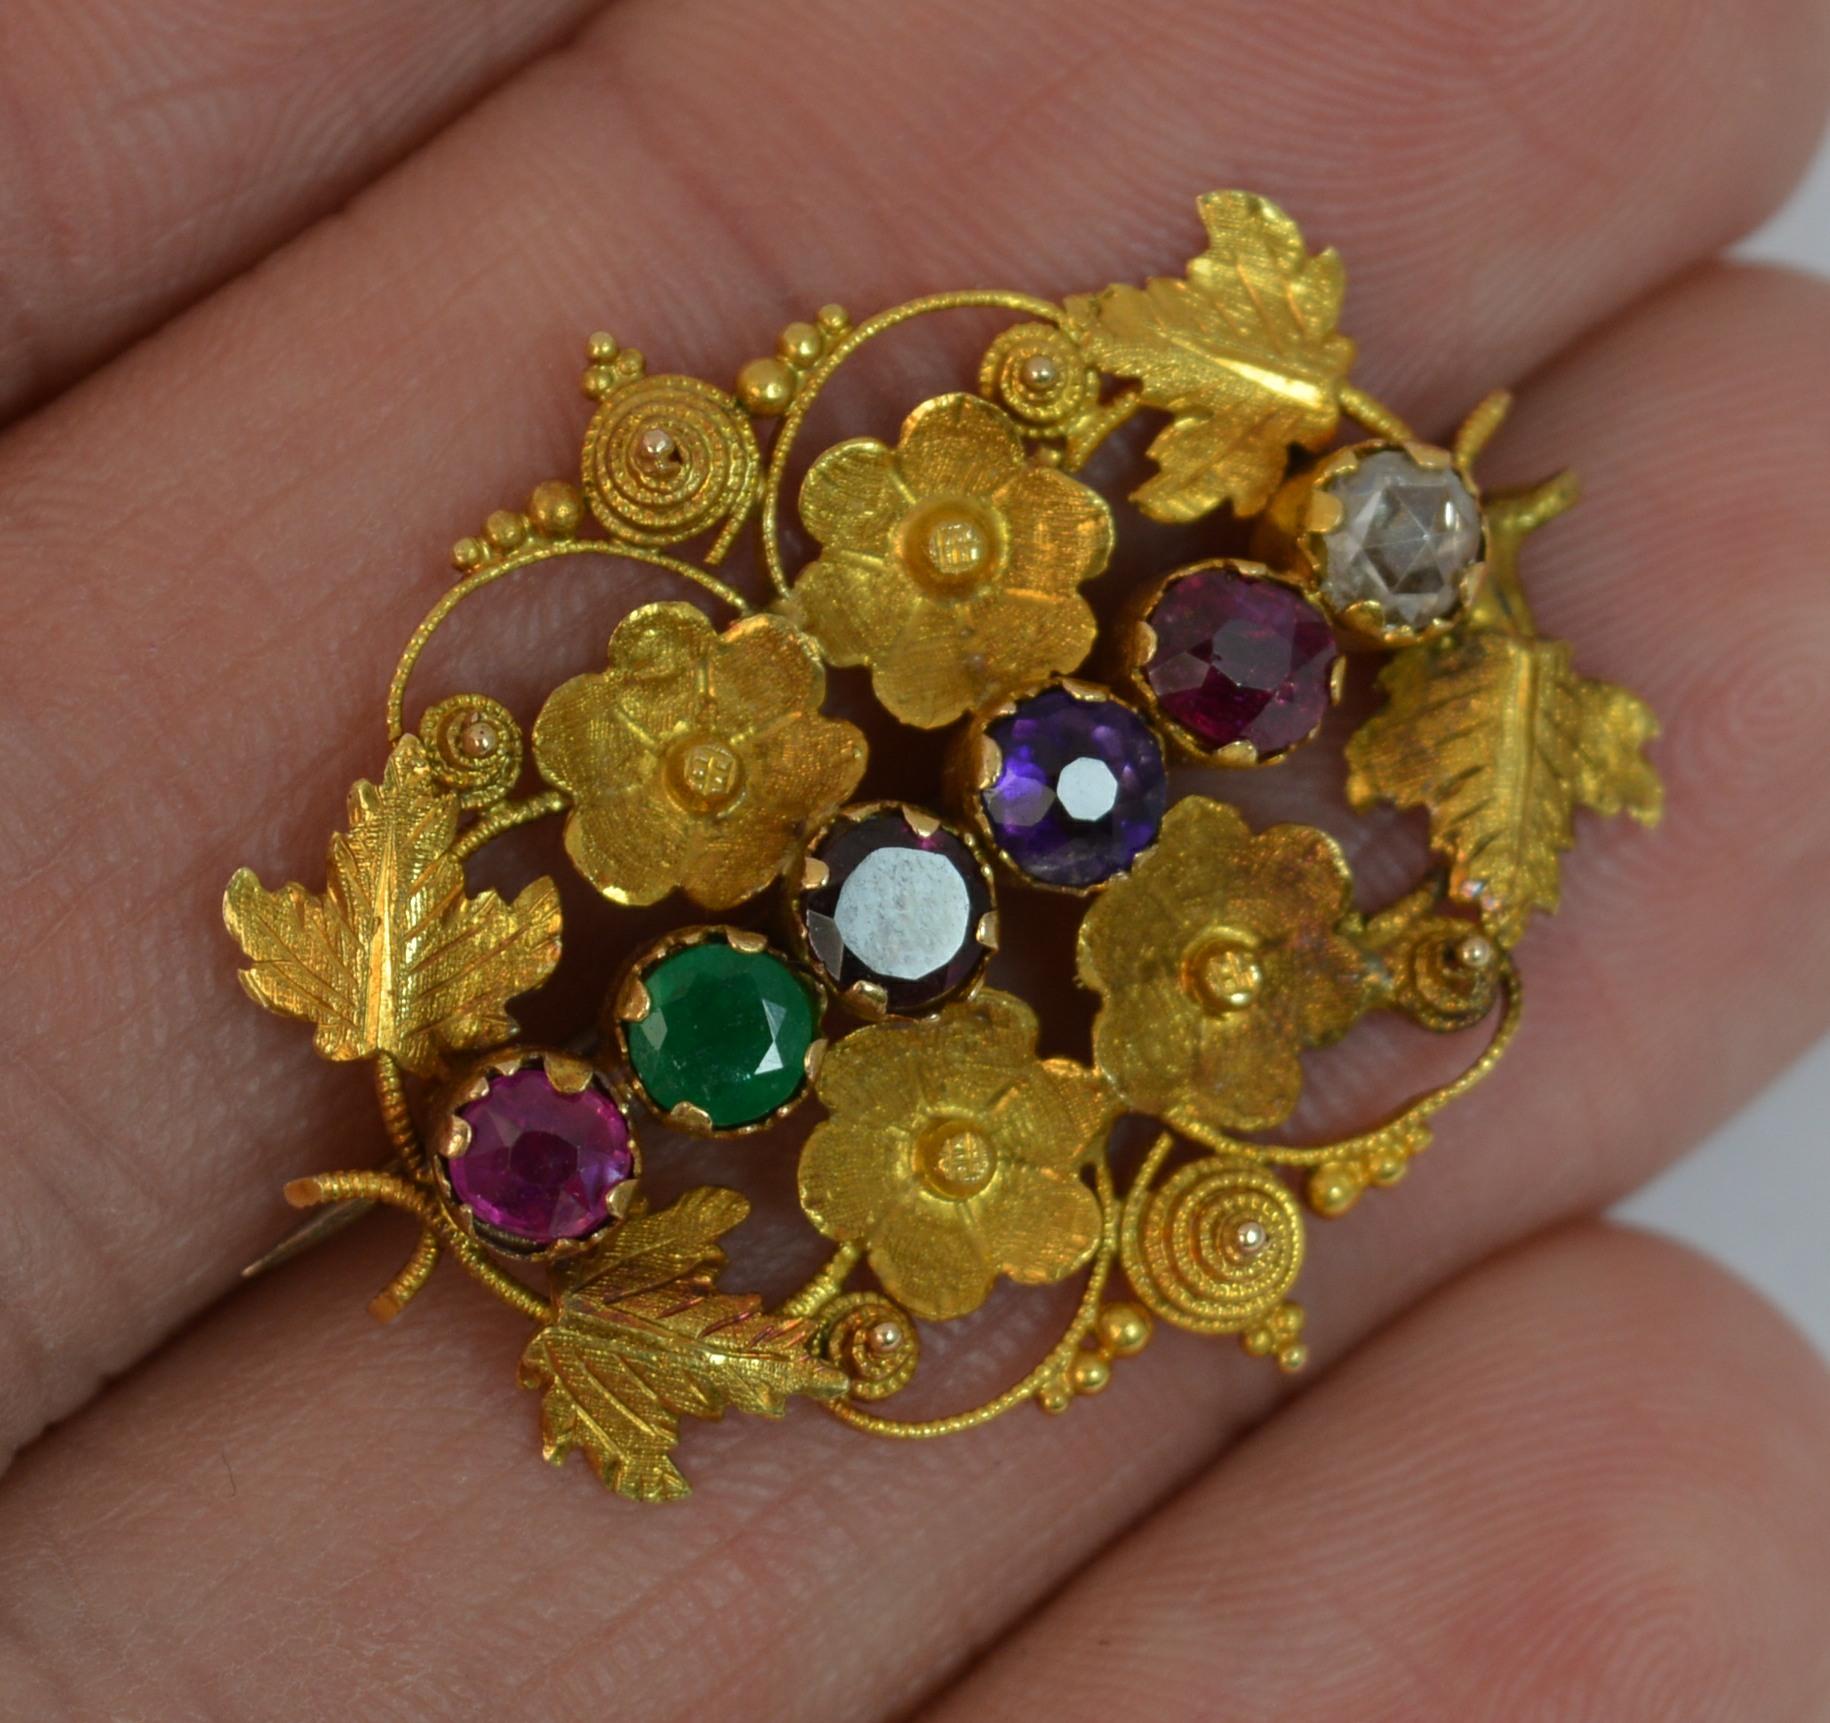 
A superb Georgian period acrostic Regard brooch.

Modelled in 18 carat yellow gold throughout.

Set with gemstones to read regard. Ruby, Emerald, Garnet, Amethyst, Ruby, Diamond. All round cut stones with a rose cut diamond.

The gold work is an